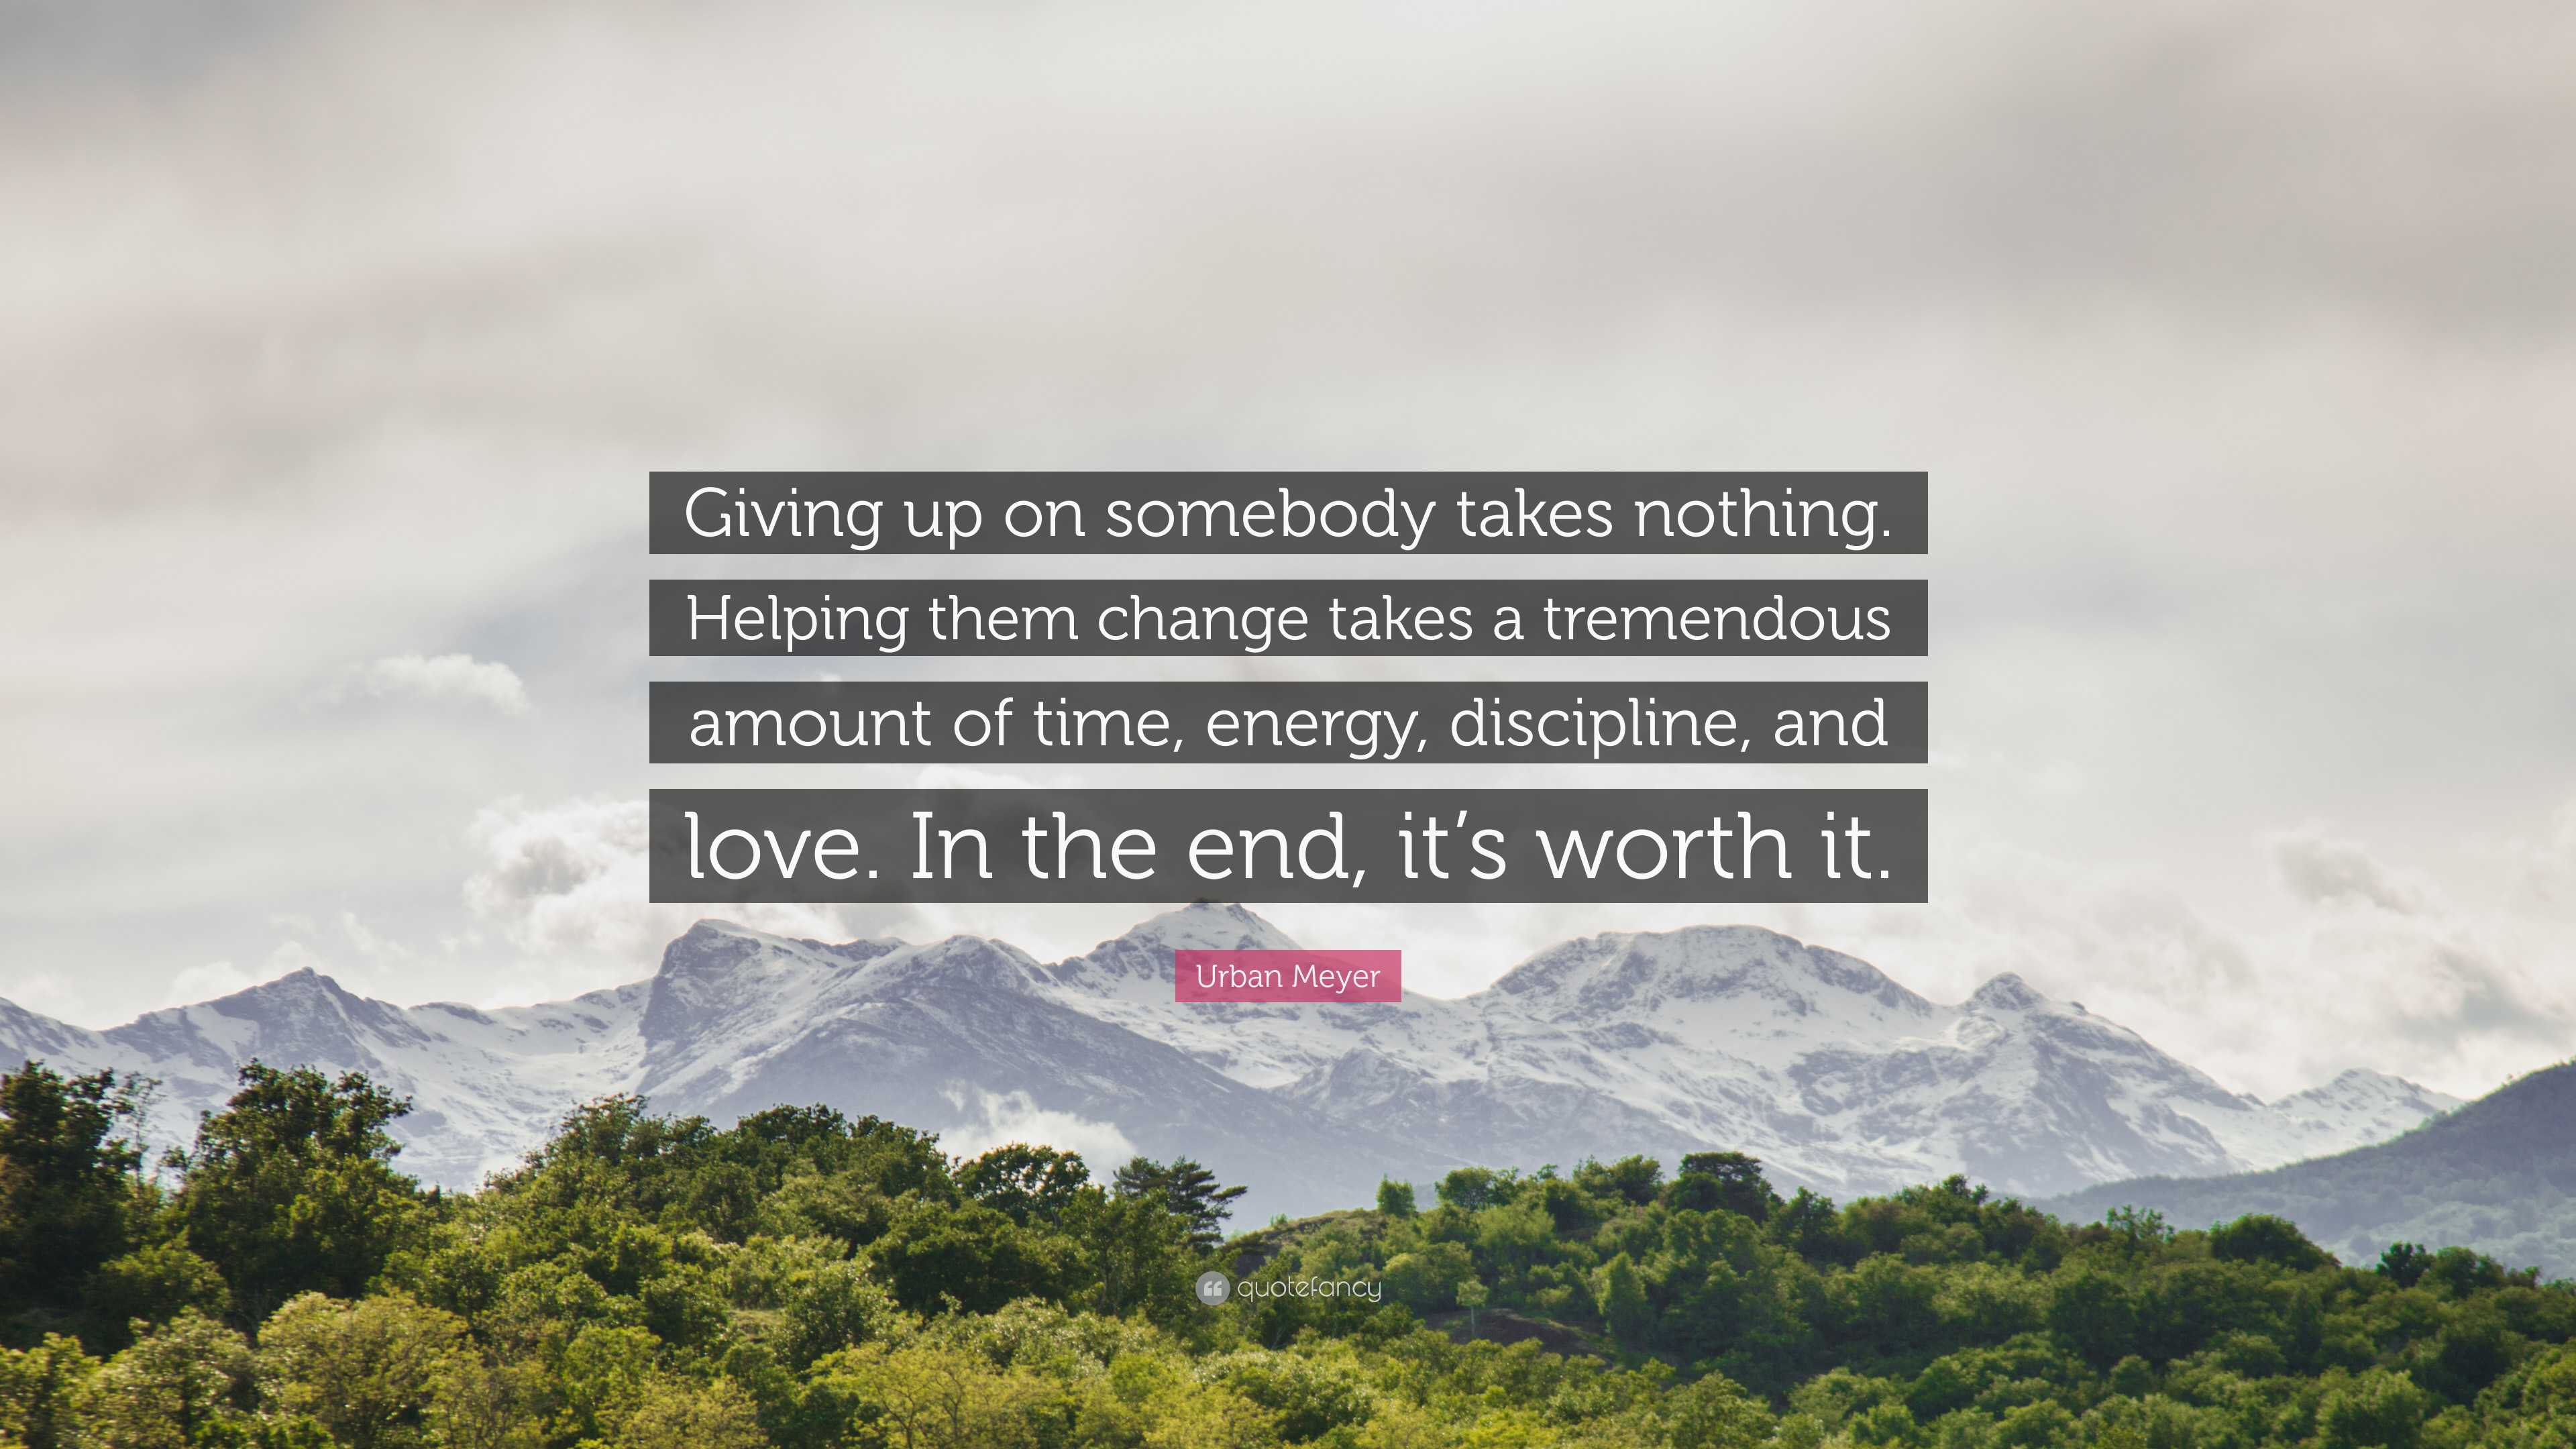 Urban Meyer Quote: “Giving up on somebody takes nothing. Helping them change  takes a tremendous amount of time, energy, discipline, and love”